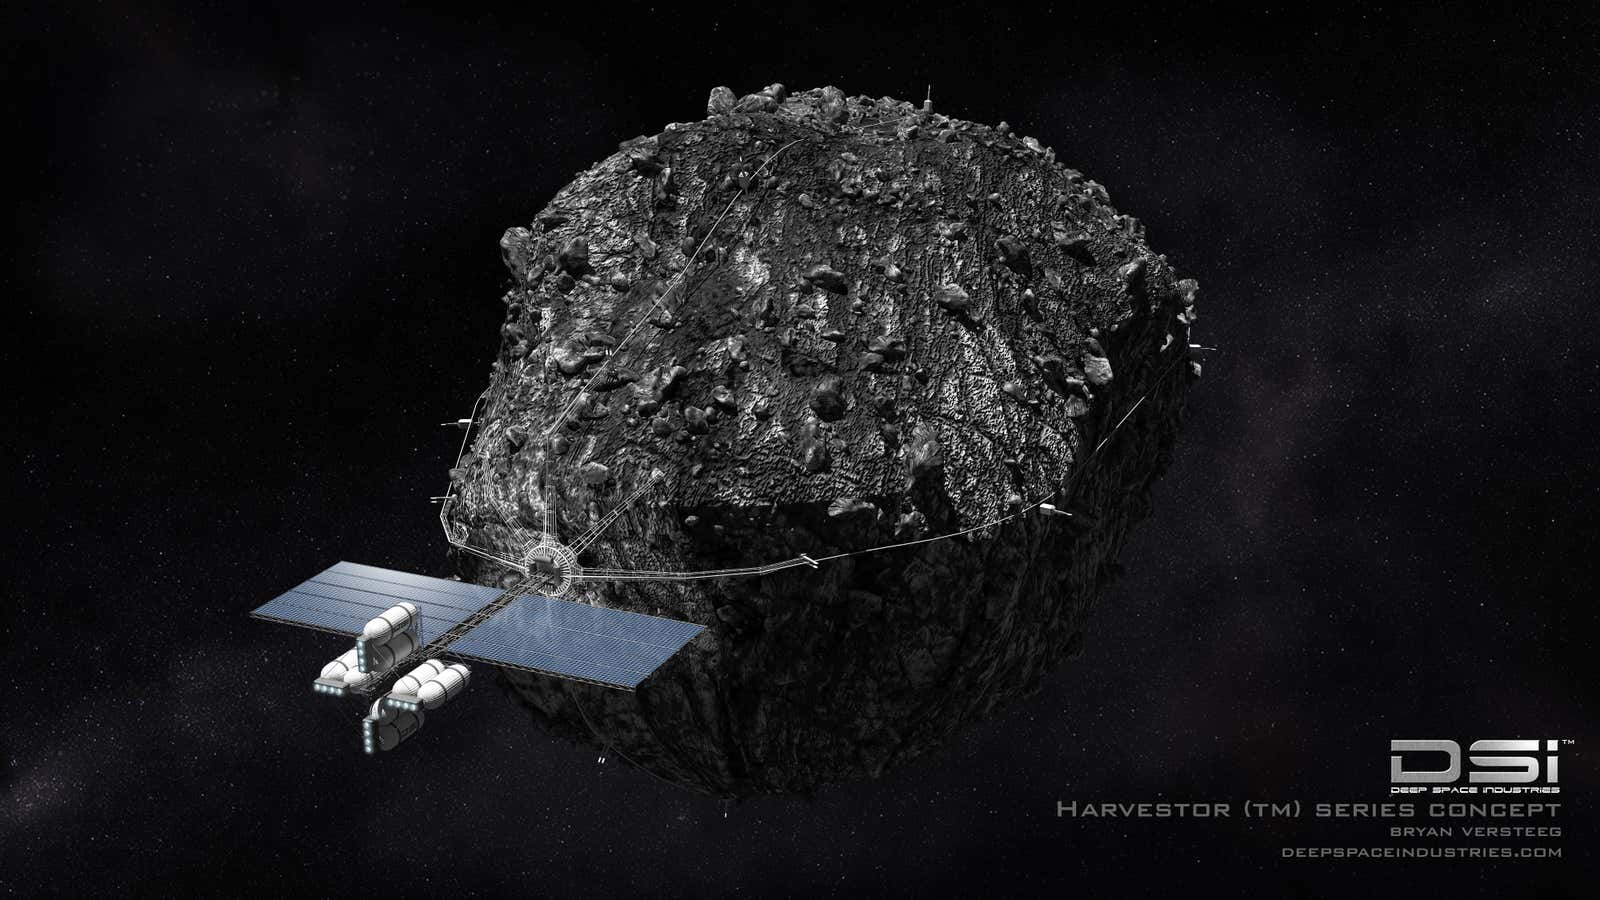 Deep Space Industries thinks it can make big bucks if it can use this “deep space harvester” to mine galactic materials.